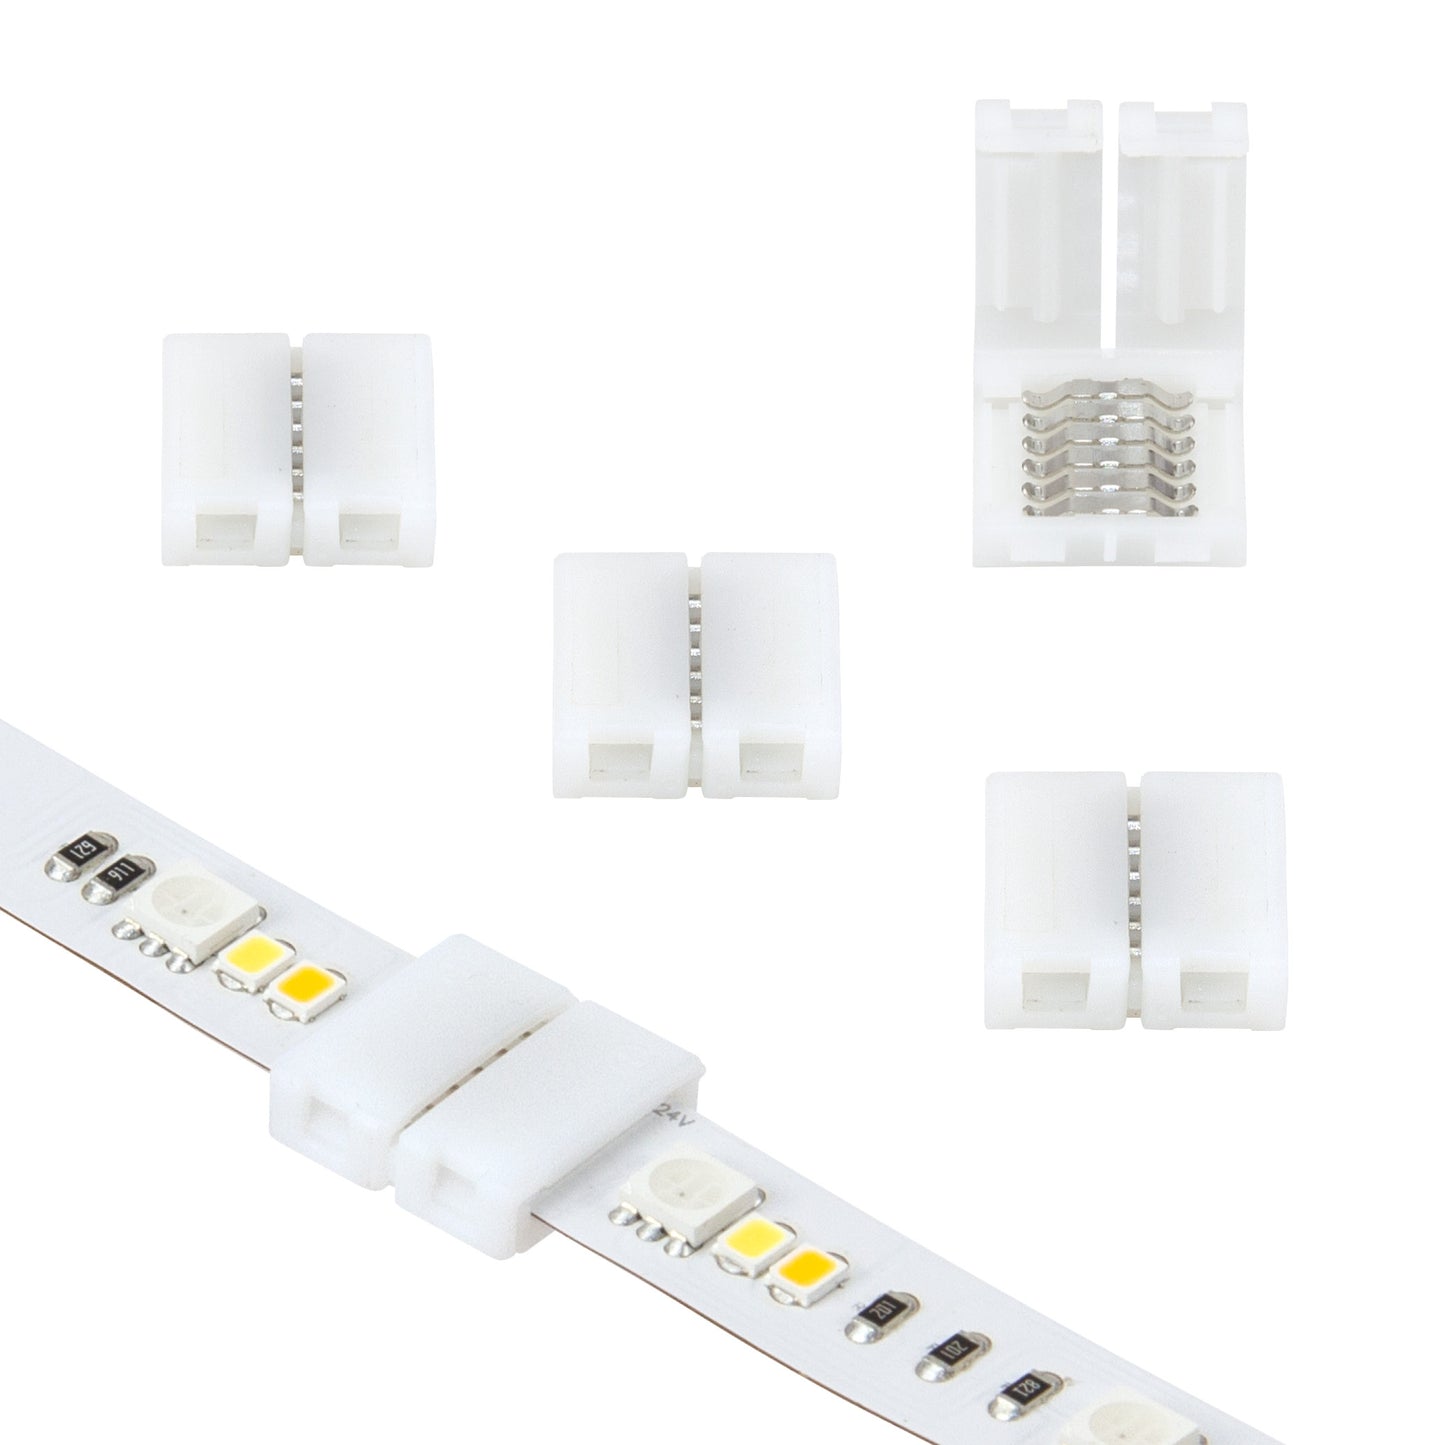 6 Pin RGB+WW LED Strip Light Tape to Tape Splice Connector